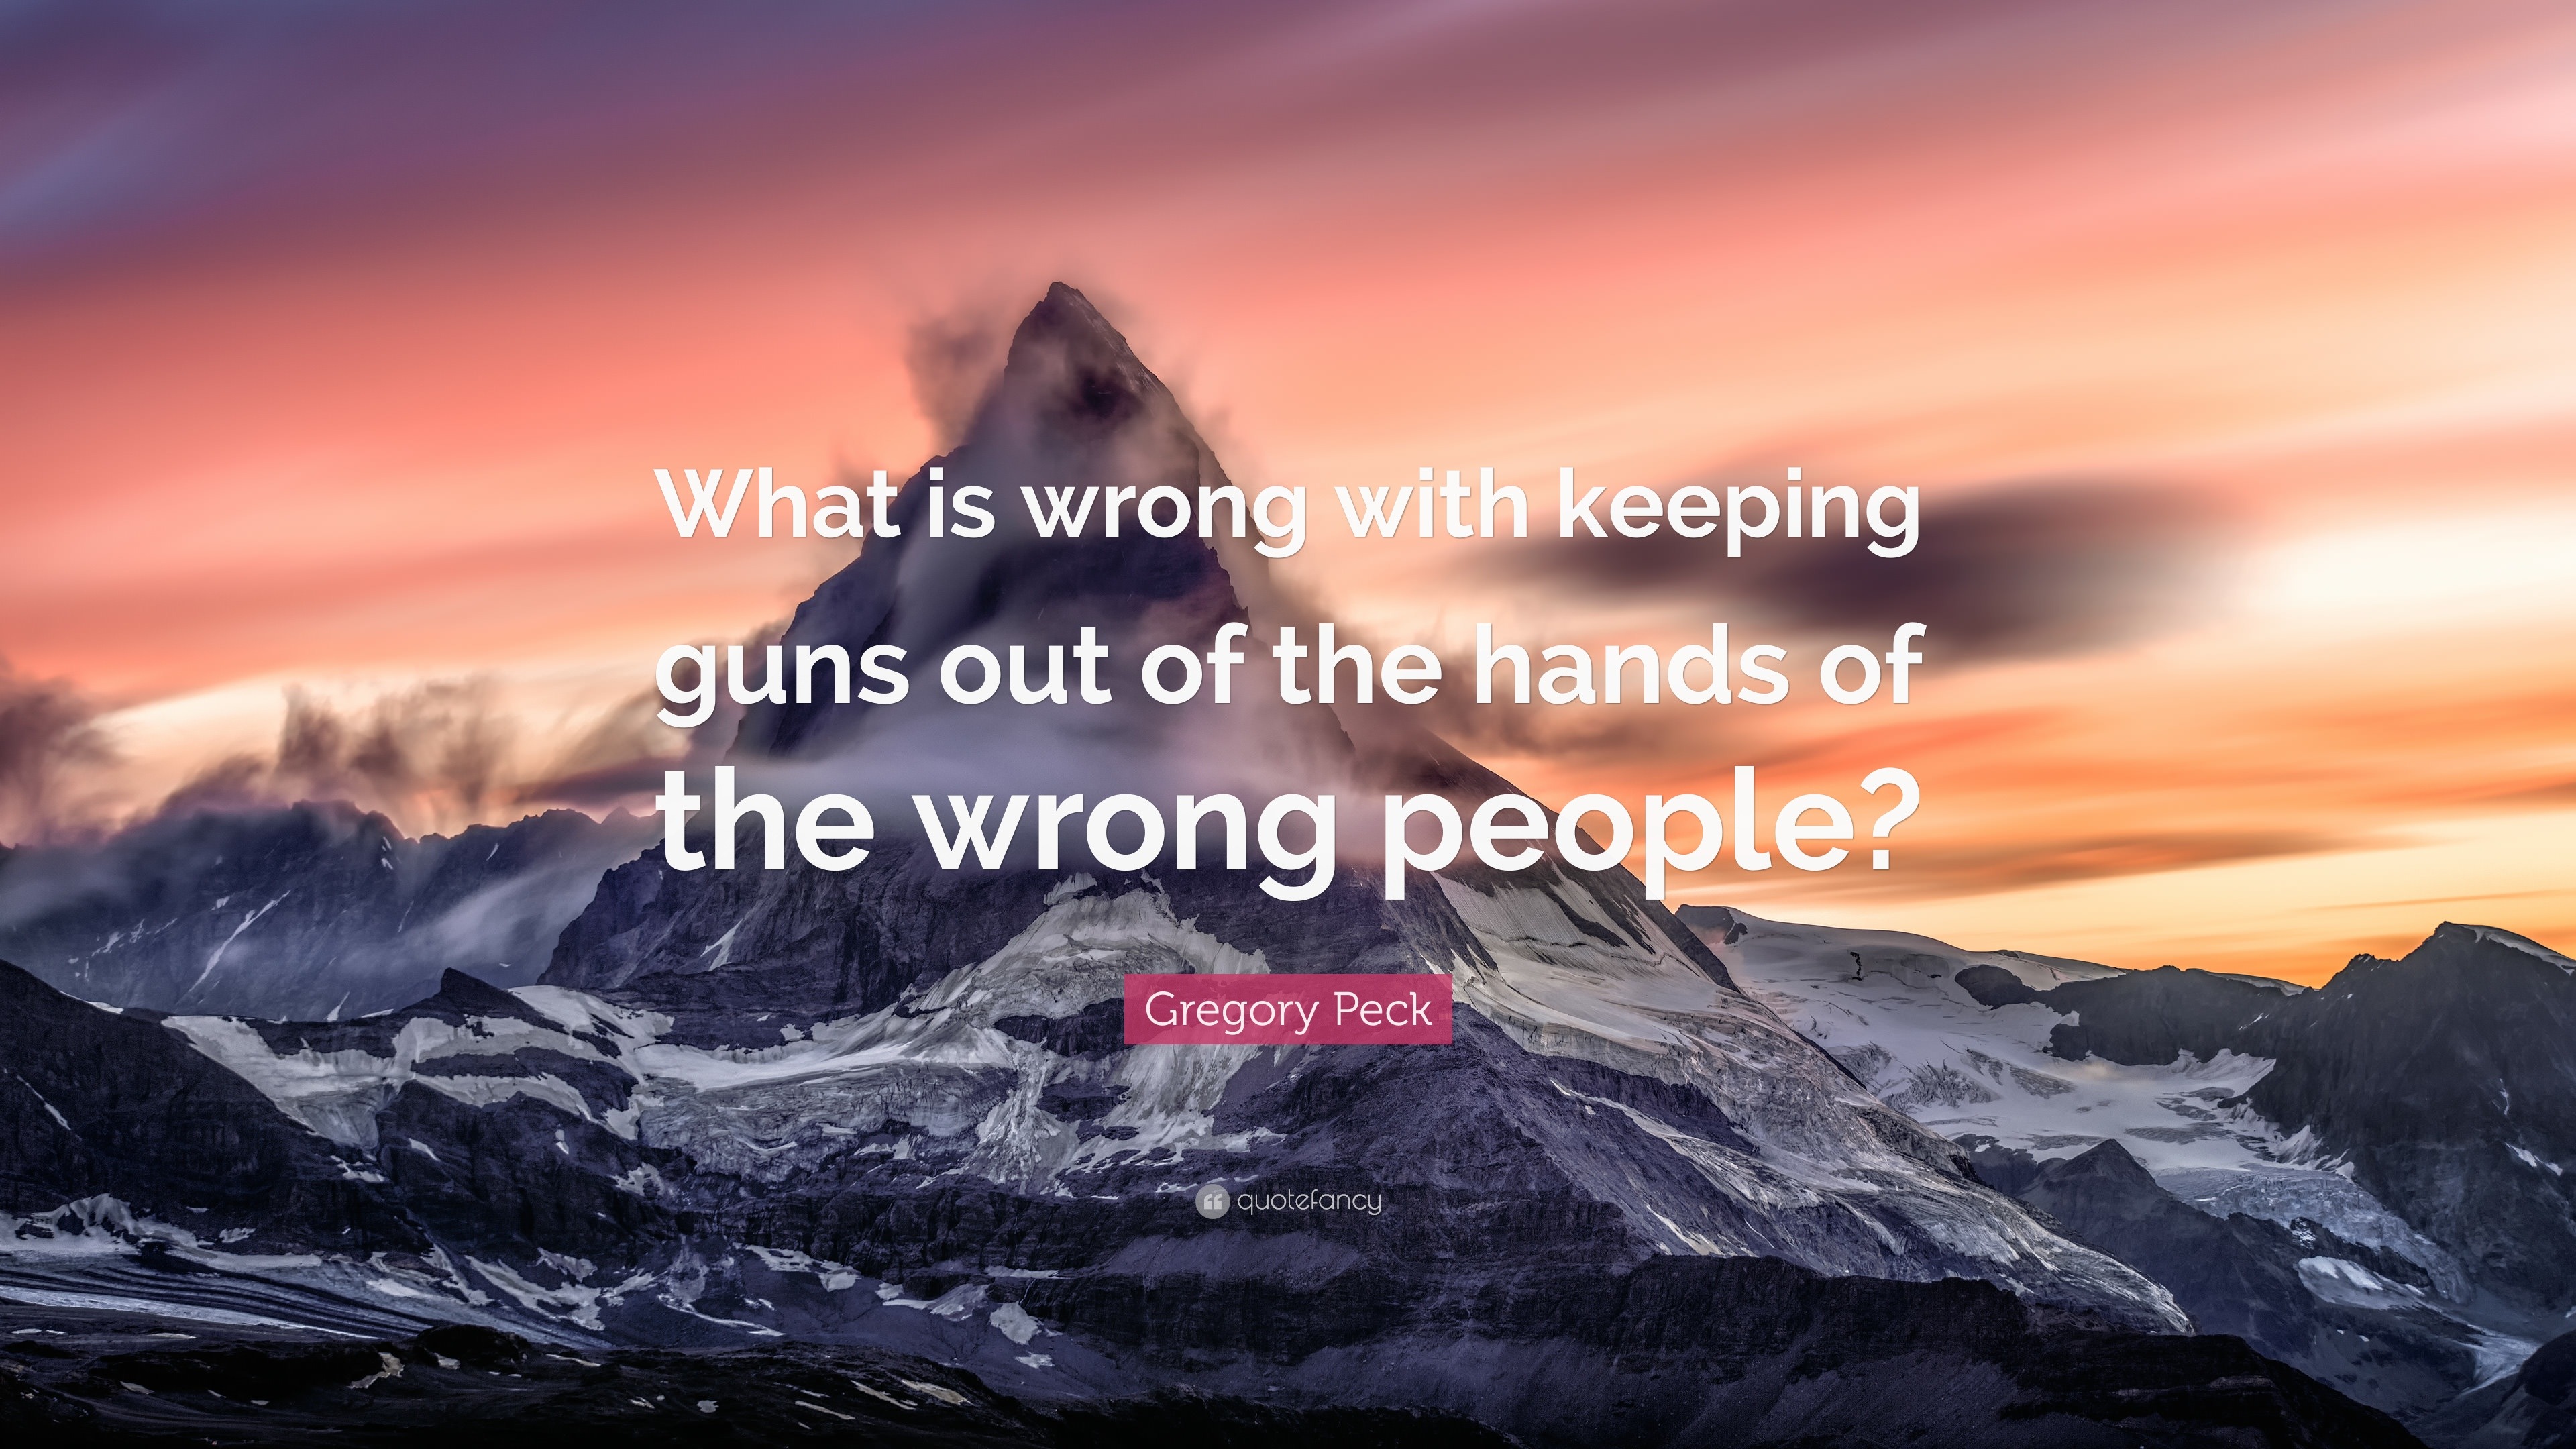 Gregory Peck Quote “what Is Wrong With Keeping Guns Out Of The Hands Of The Wrong People” 8632